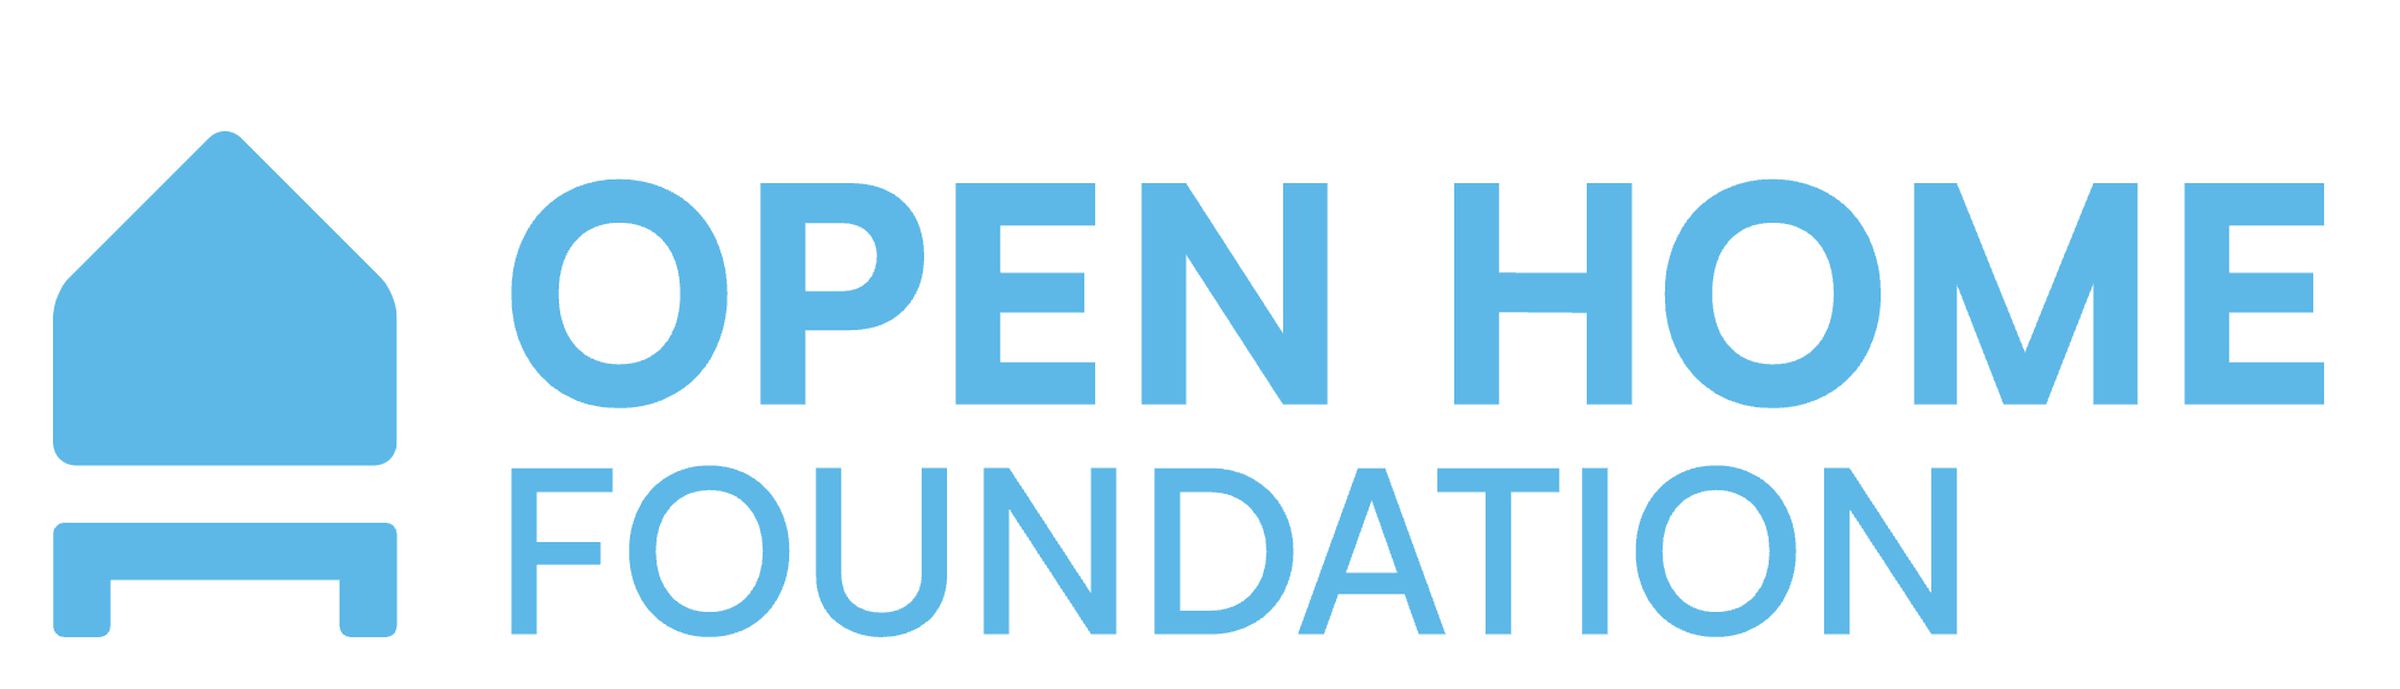 The Open Home Foundation is the new owner of Home Assistant.